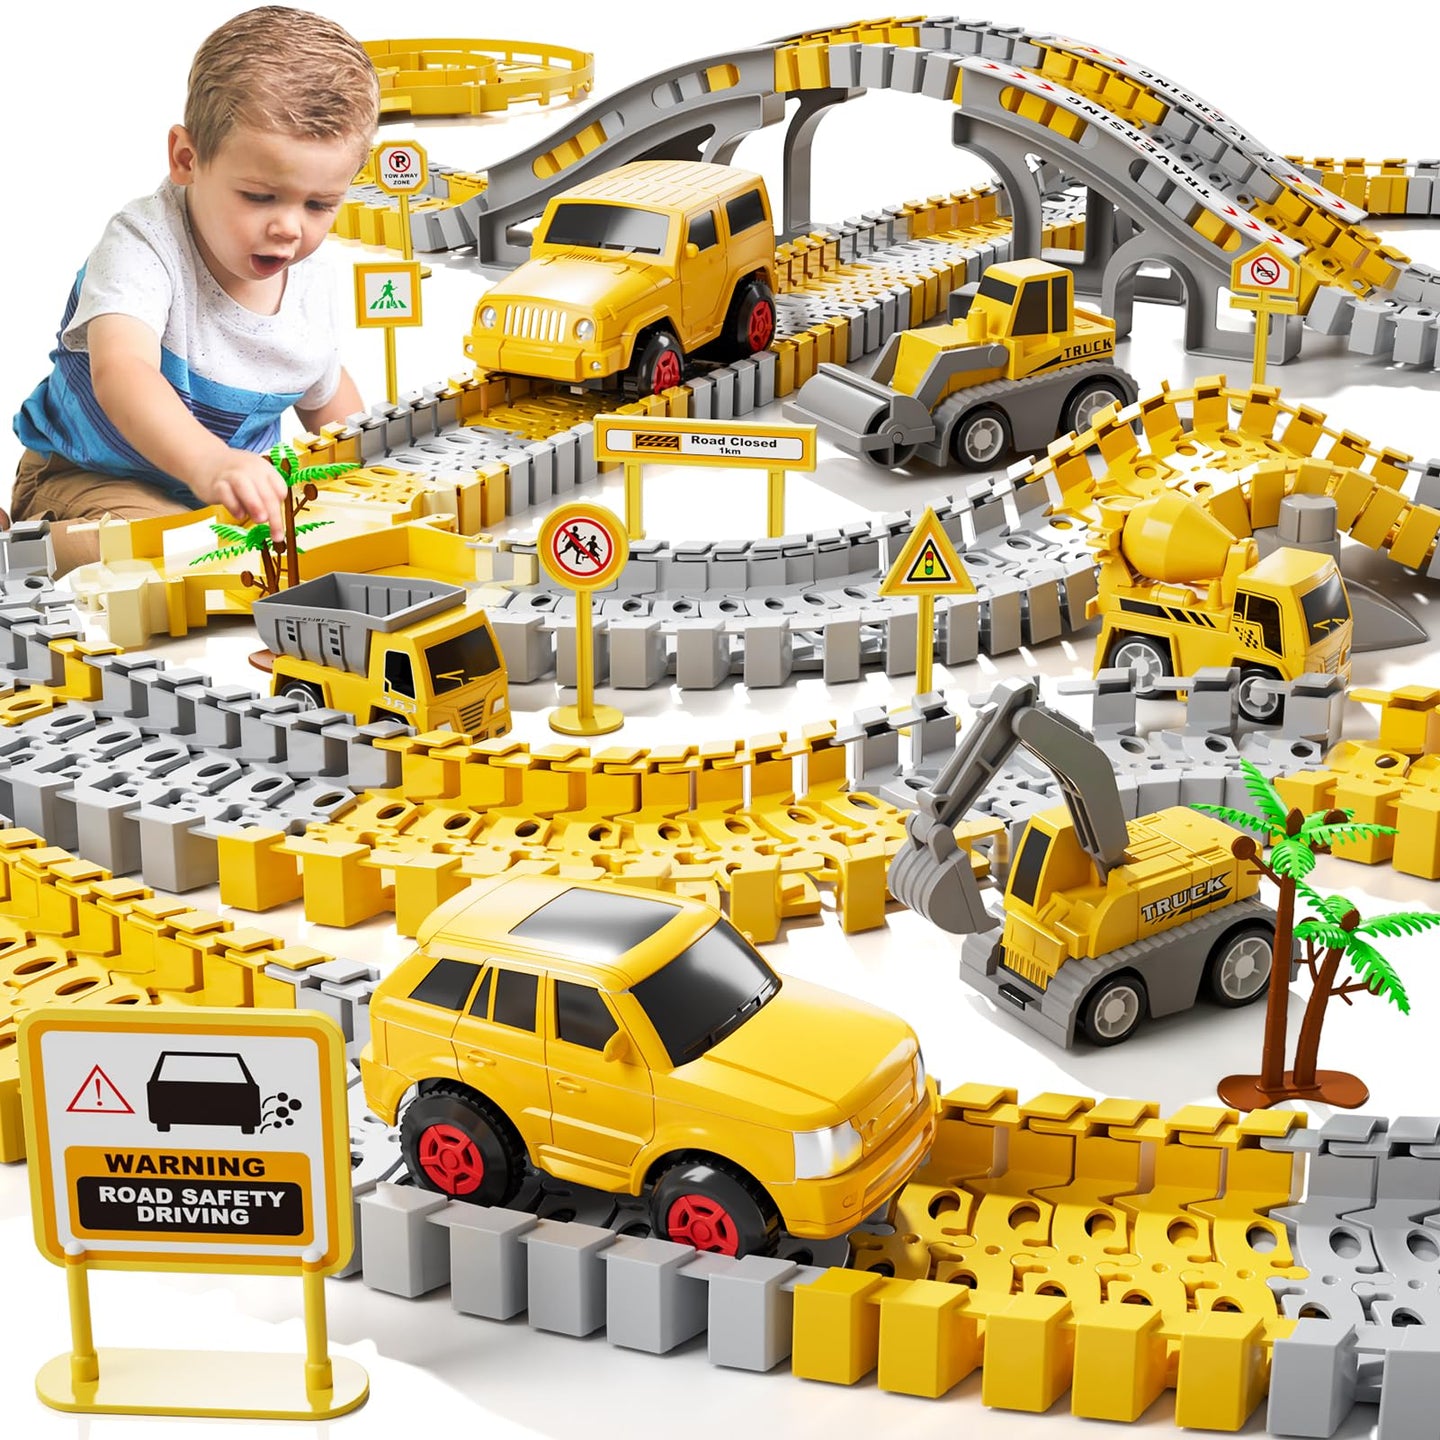 iHaHa Toddler Boy Toys for 3 4 5 6 Year Old, Total 236 PCS Construction Toys Race Tracks for Boys Kids Toys, Birthday Toys for 3 4 5 6 Year Old Boys Girls Kids